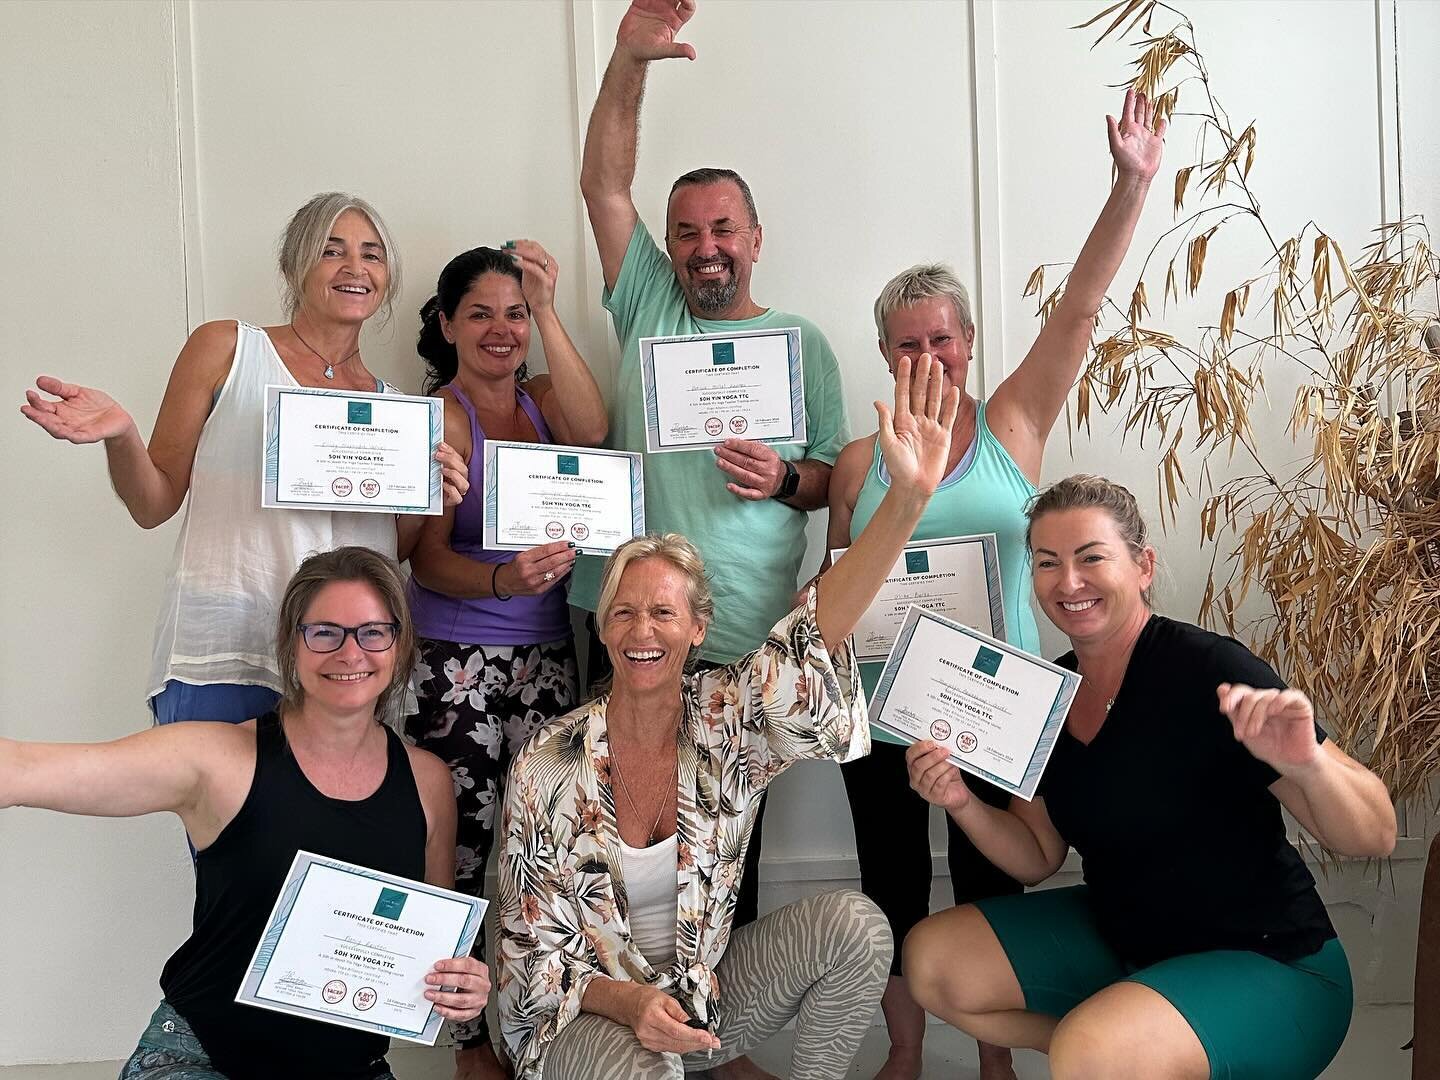 50h Yin Yoga TTC on Bonaire
Part 2

So grateful to have hosted this course on my home island. 🙏🏼&hearts;️
It was a very special journey together. 

In part 2 we did more wonderful Yin Yoga practices, dived deeper into anatomy (learning about the Yi